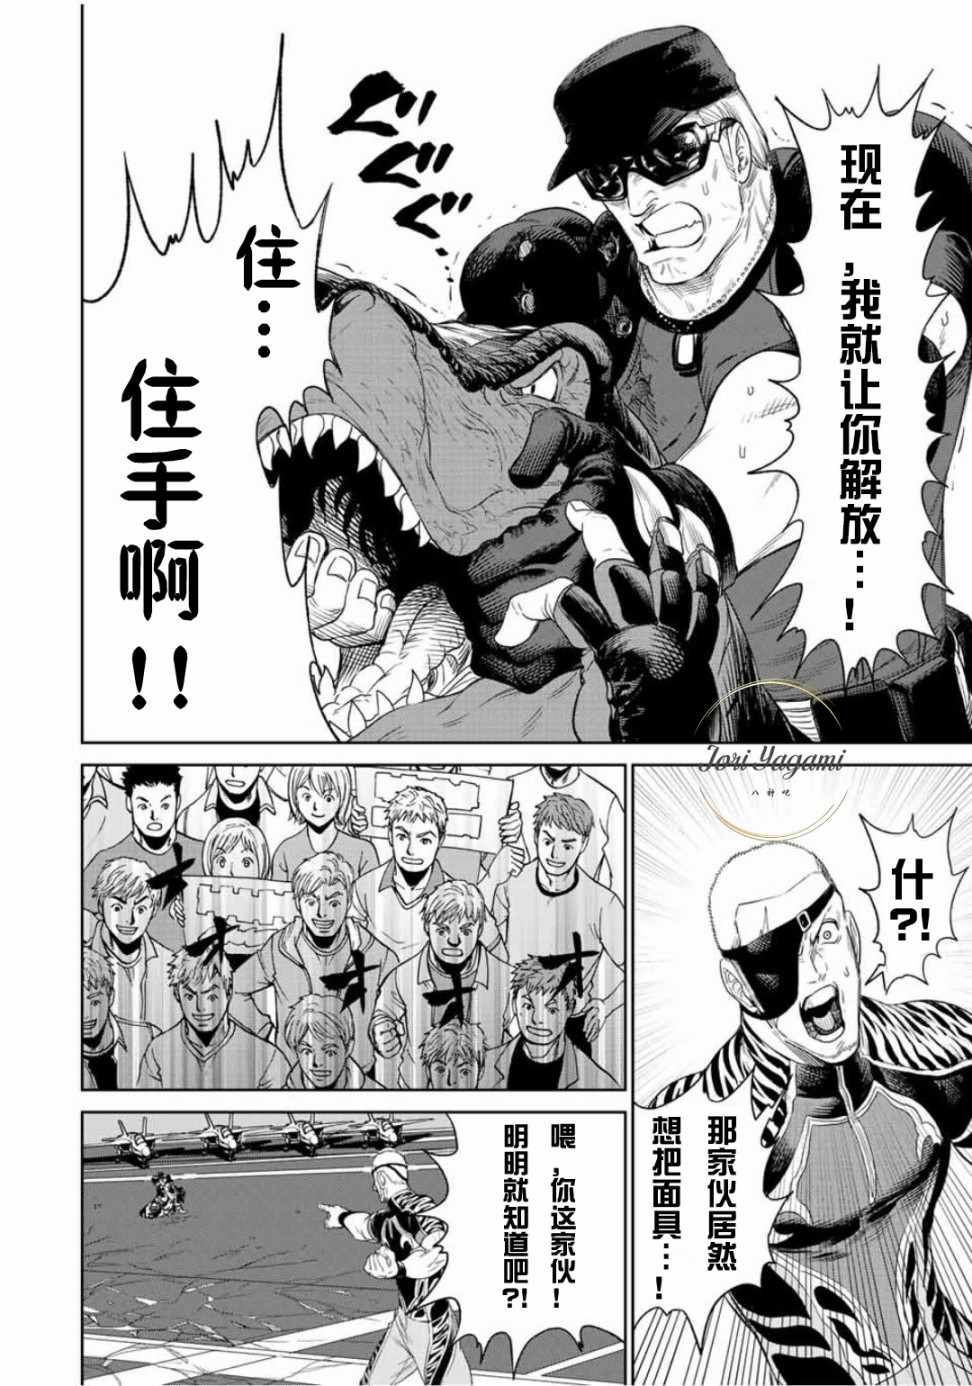 《THE KING OF FIGHTERS～A NEW BEGINNING～》漫画 ANEWBEGINNING 036话